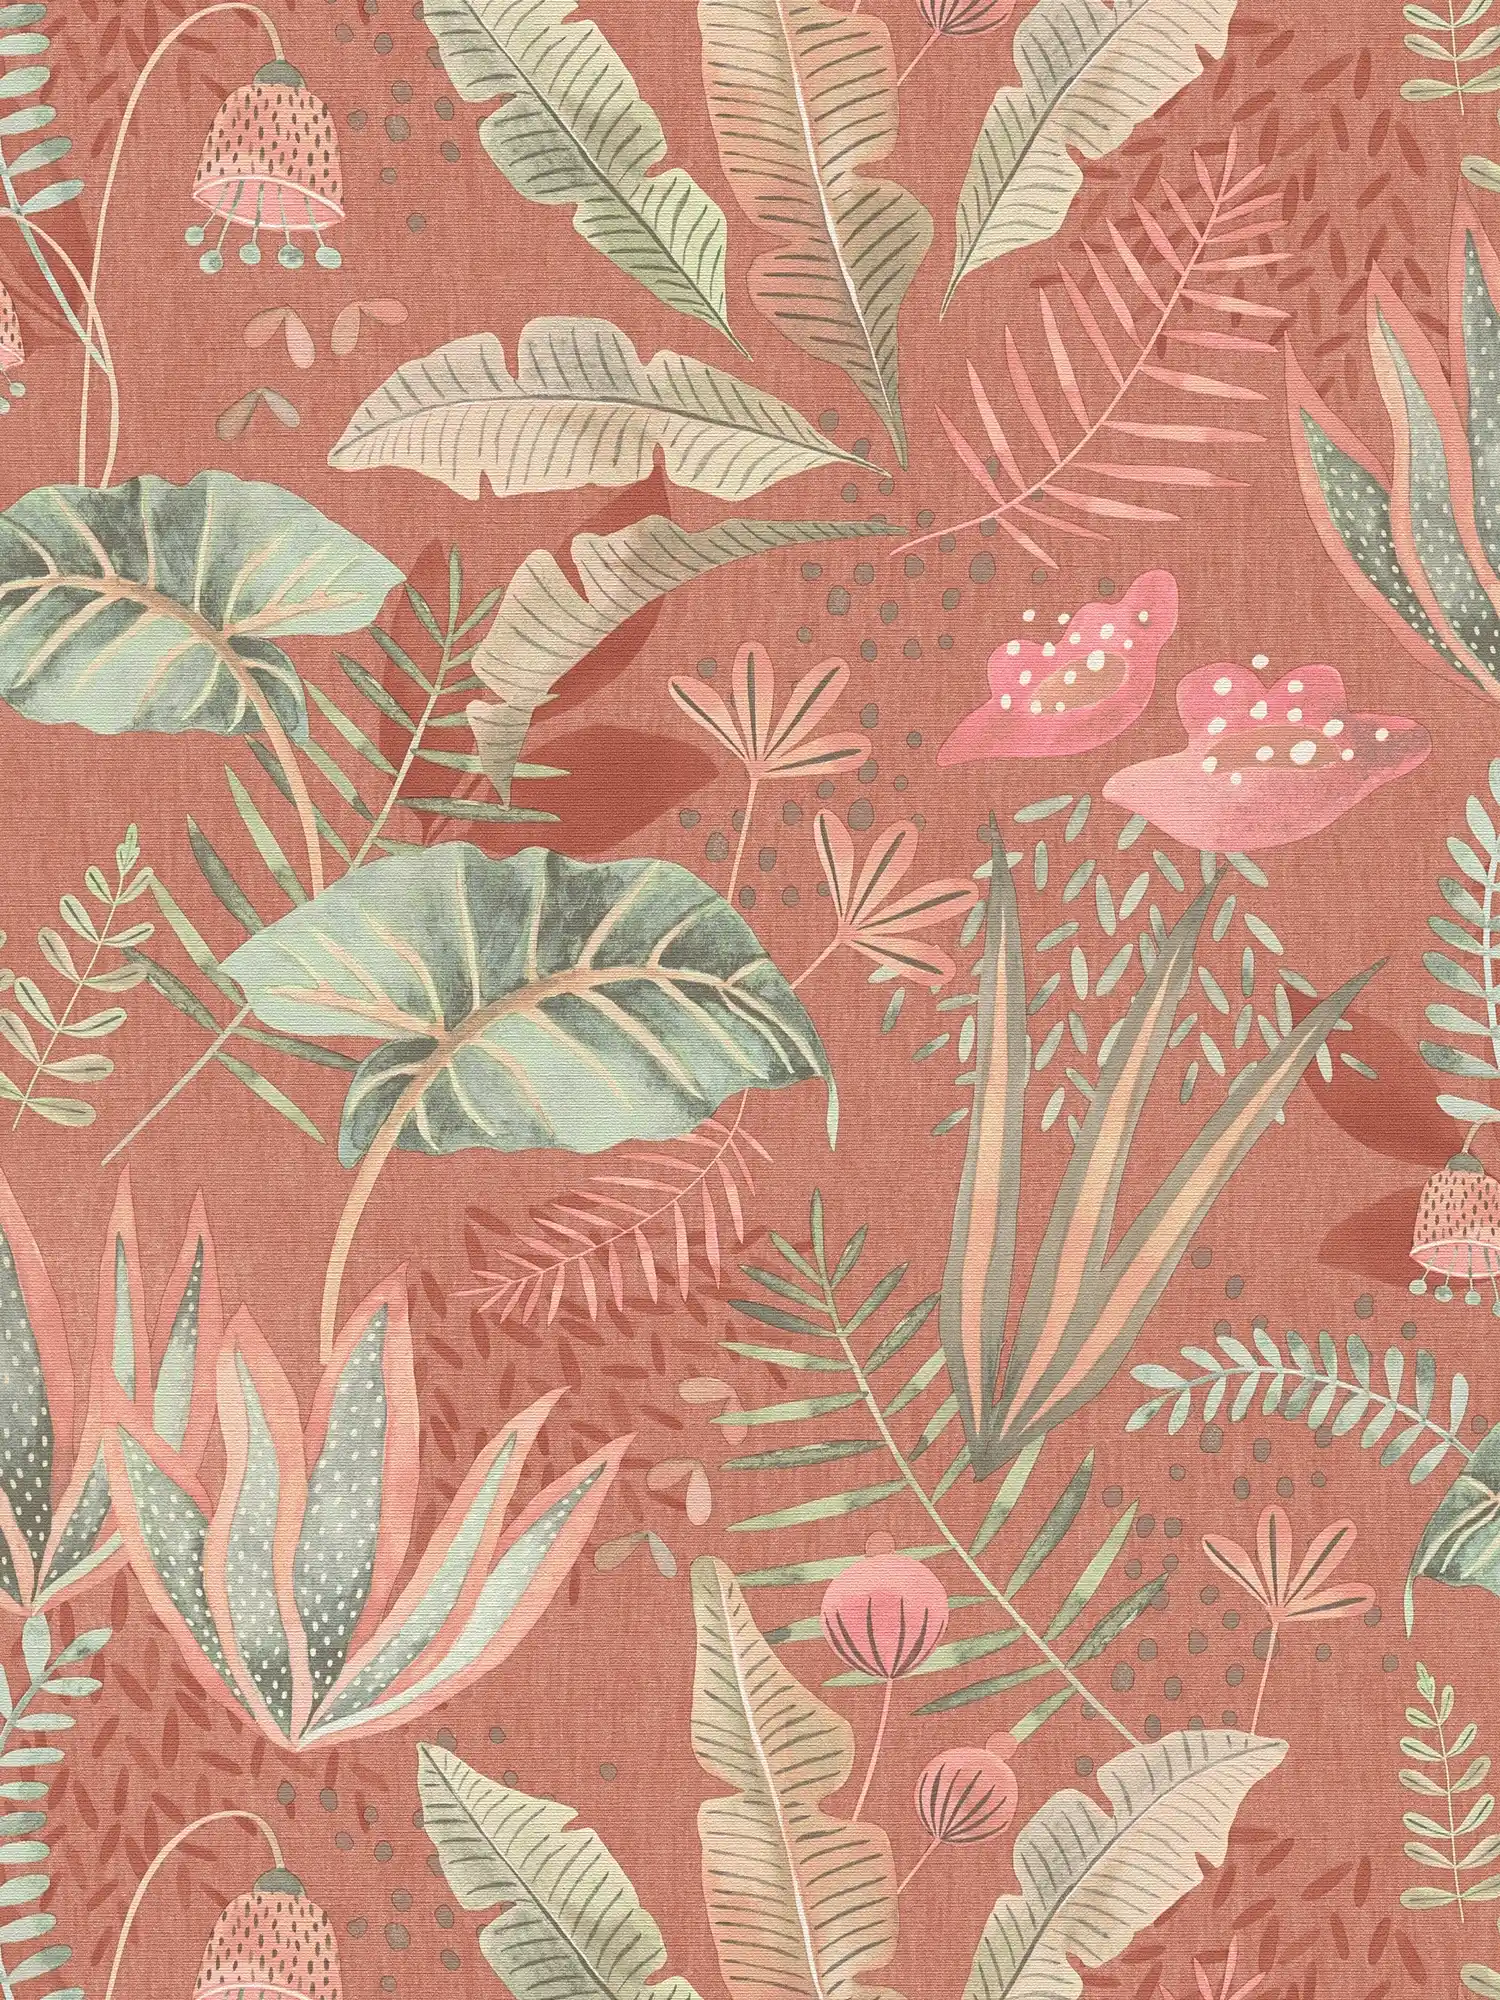 Floral wallpaper with mixed leaves slightly textured, matt - red, orange, green
